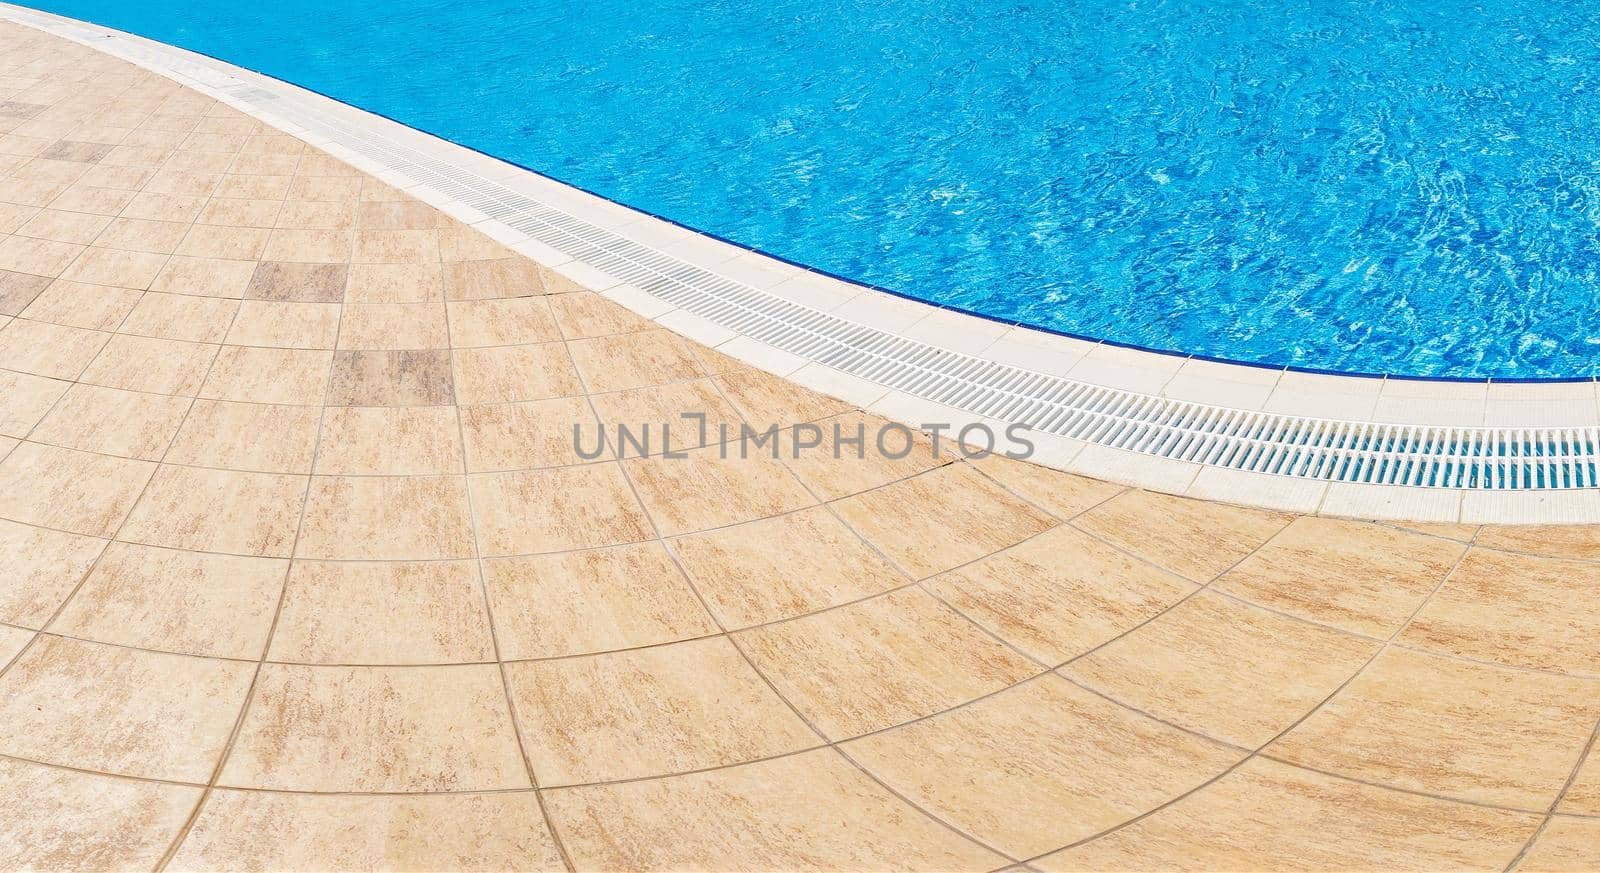 Abstract Pool with blue water background. Top view of swimming pool and floor texture. Panorama of pool bottom with tile pattern and transparent water. Summer travel and vacation background concept by panophotograph